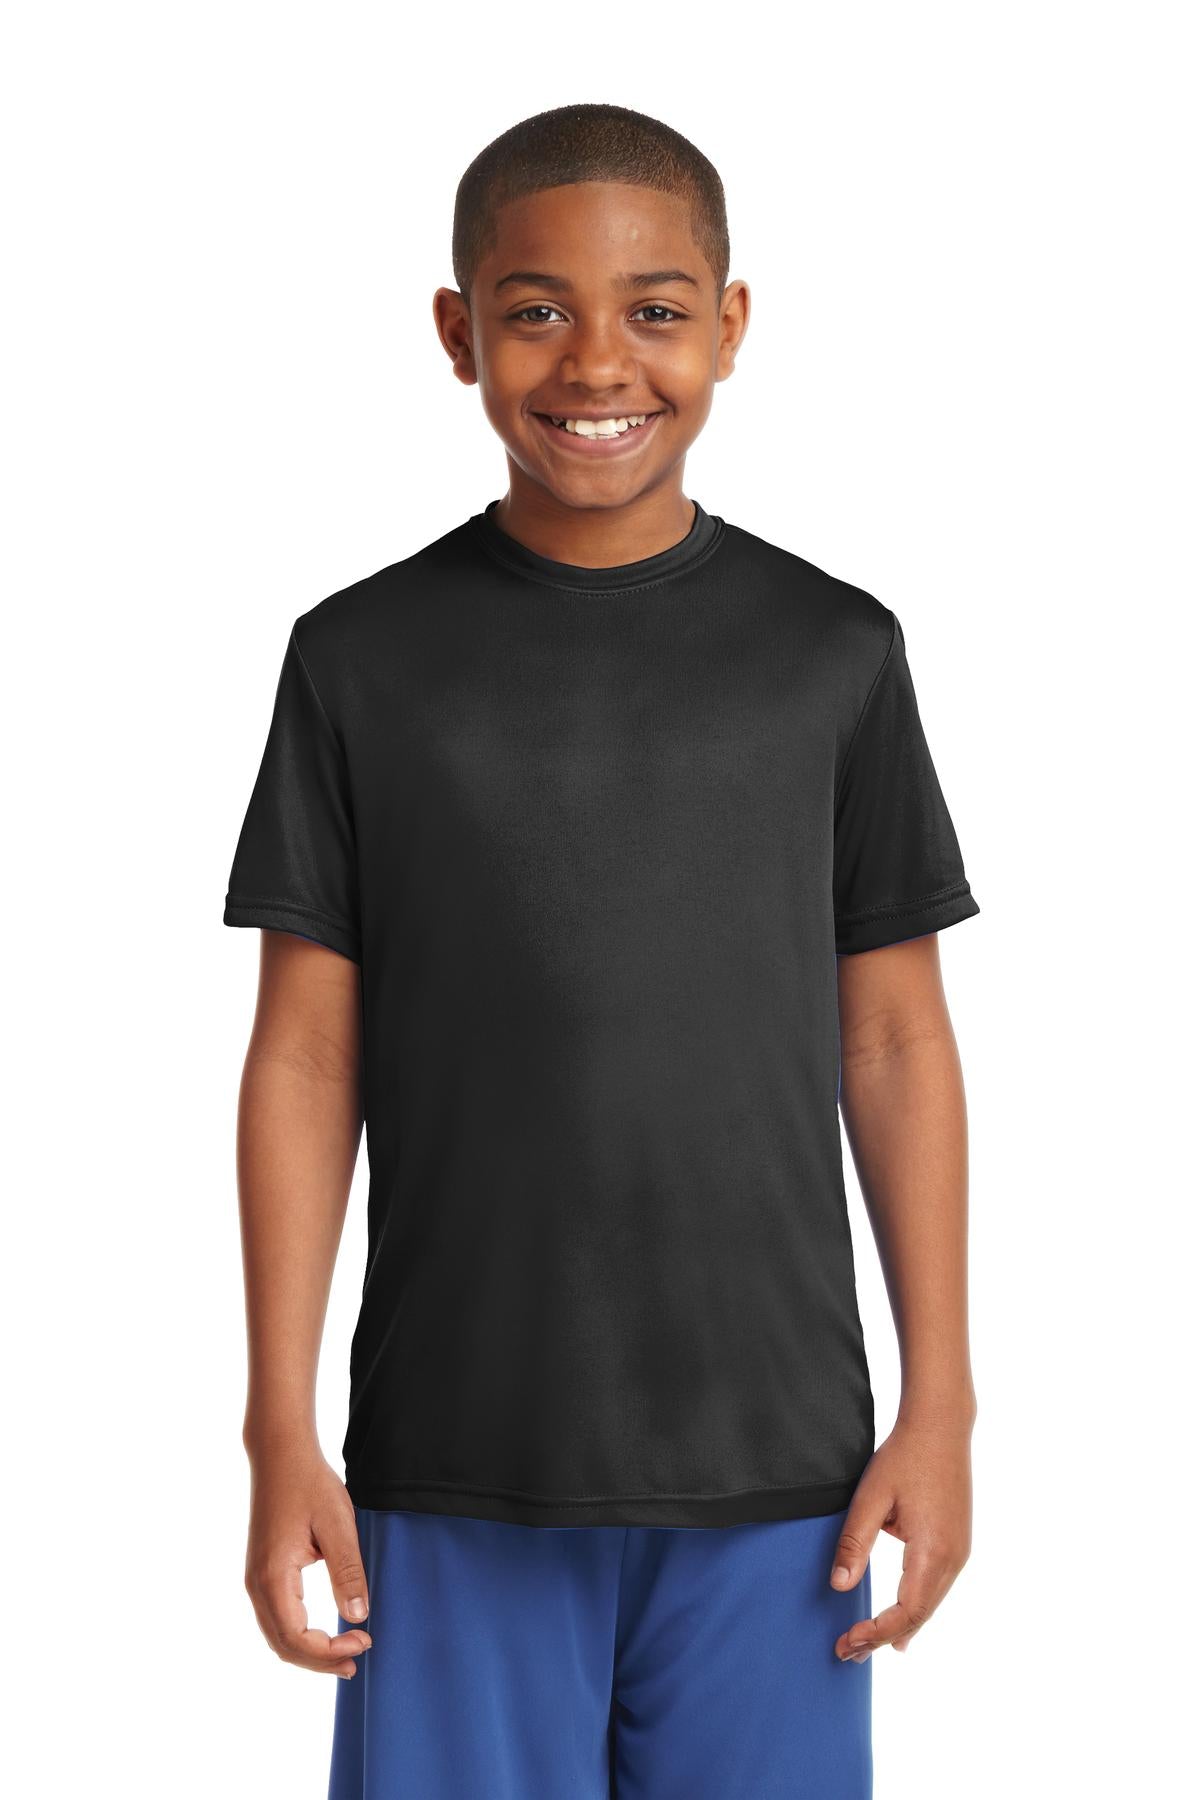 Sport-Tek® Youth PosiCharge® Competitor™ Tee. YST350 [Black] - DFW Impression